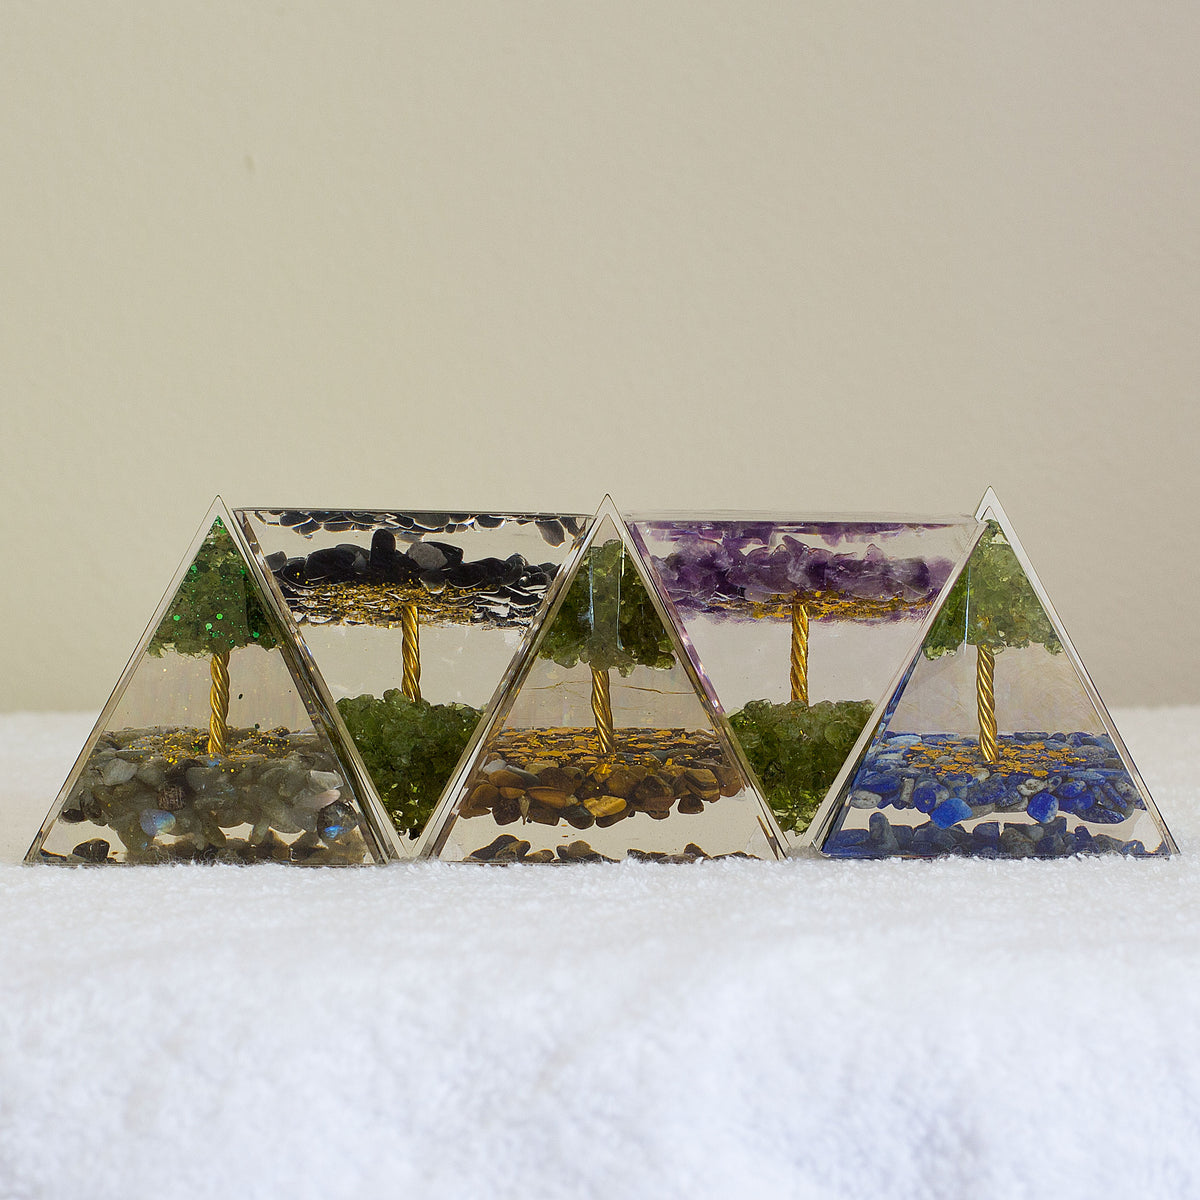 By tapping into the cosmic universal energy with a mix of quartz crystals, semi-precious gemstones, metals, and resin, you can balance out the life energy that surrounds you. Any negative vibes and energy that affect your body and mind can be removed by using an orgonite pyramid in your home. These healing crystals are made of metal shavings, resin, and gemstones, which balance electromagnetic fields and promote positive energy.